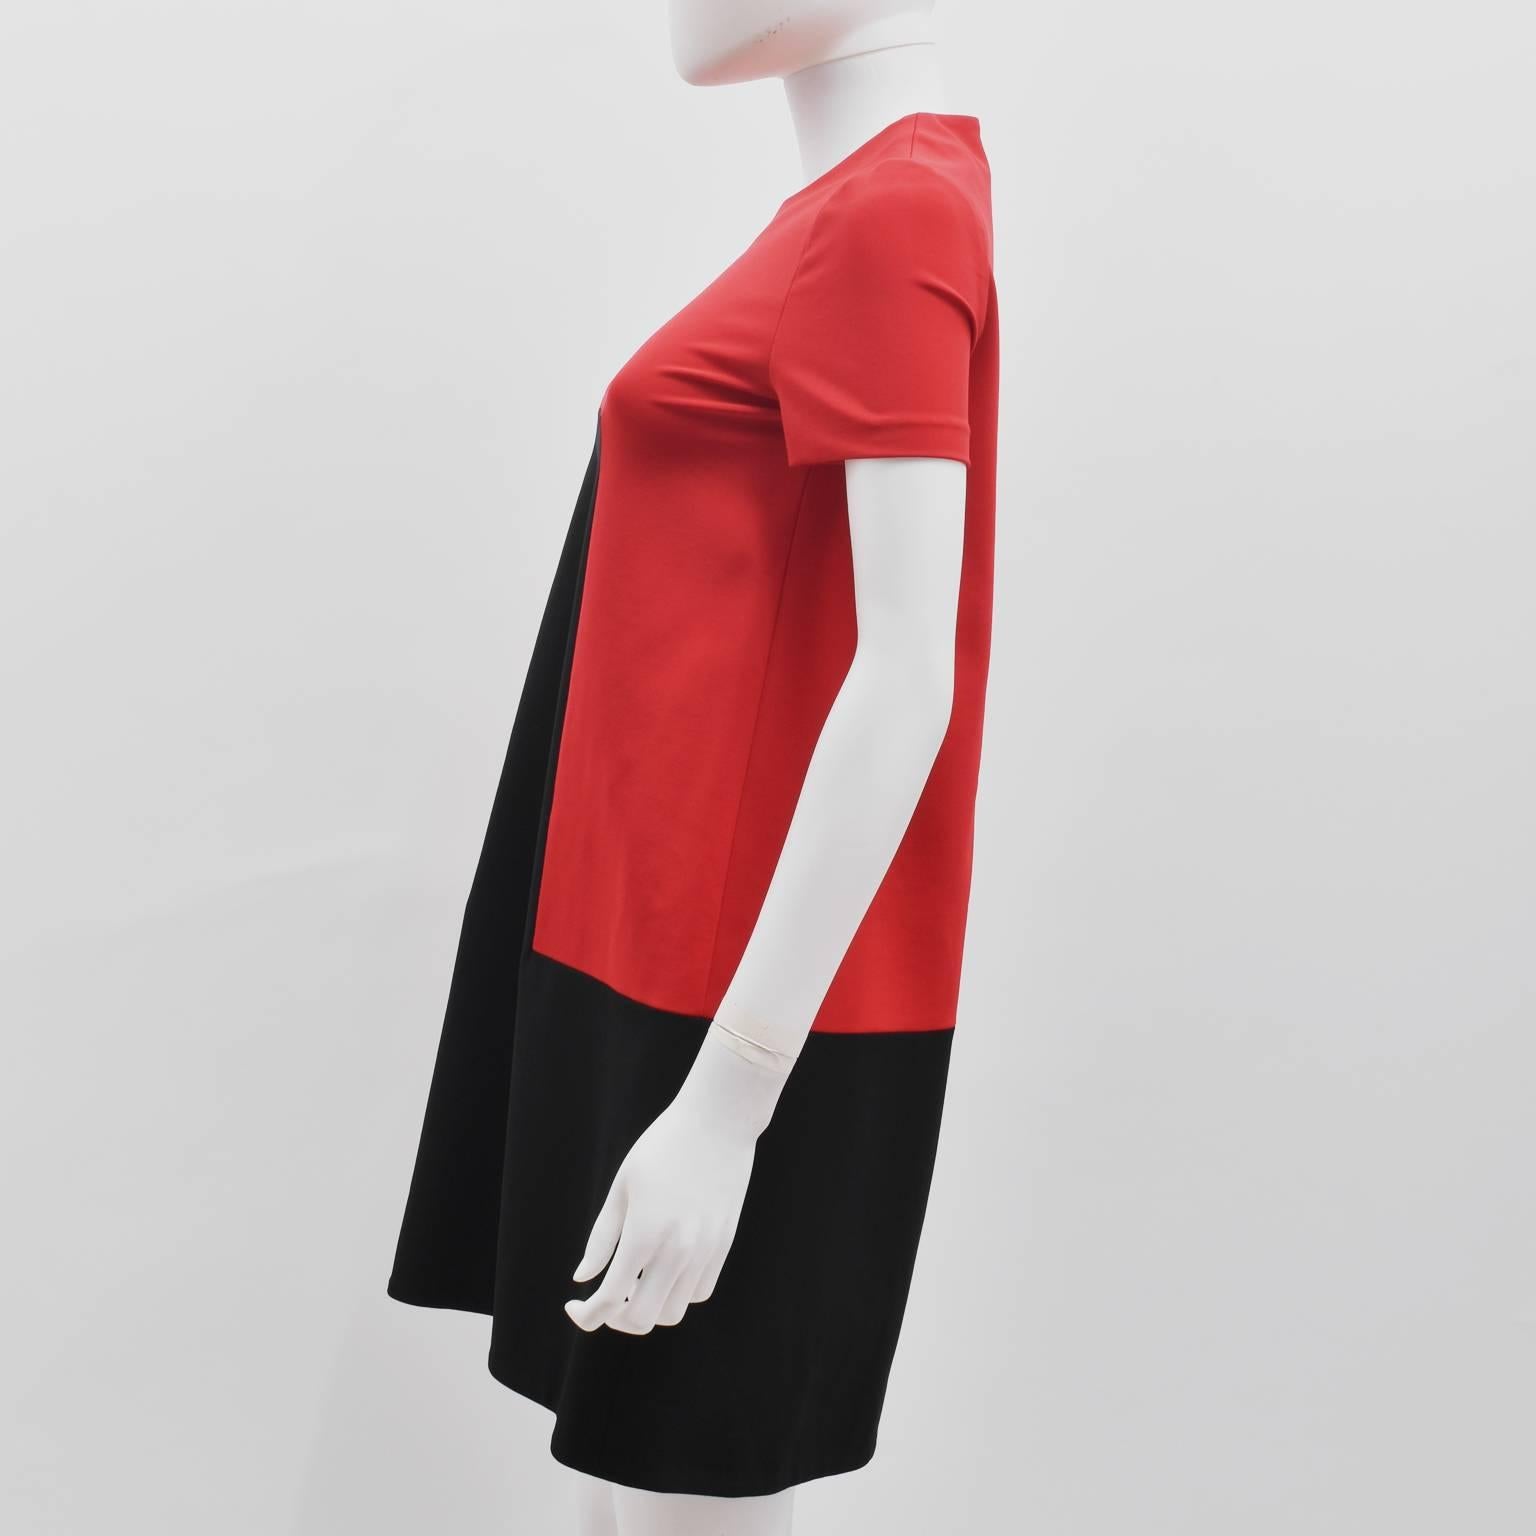 Alexander McQueen Red and Black A-Line Shift Dress  In Excellent Condition For Sale In London, GB